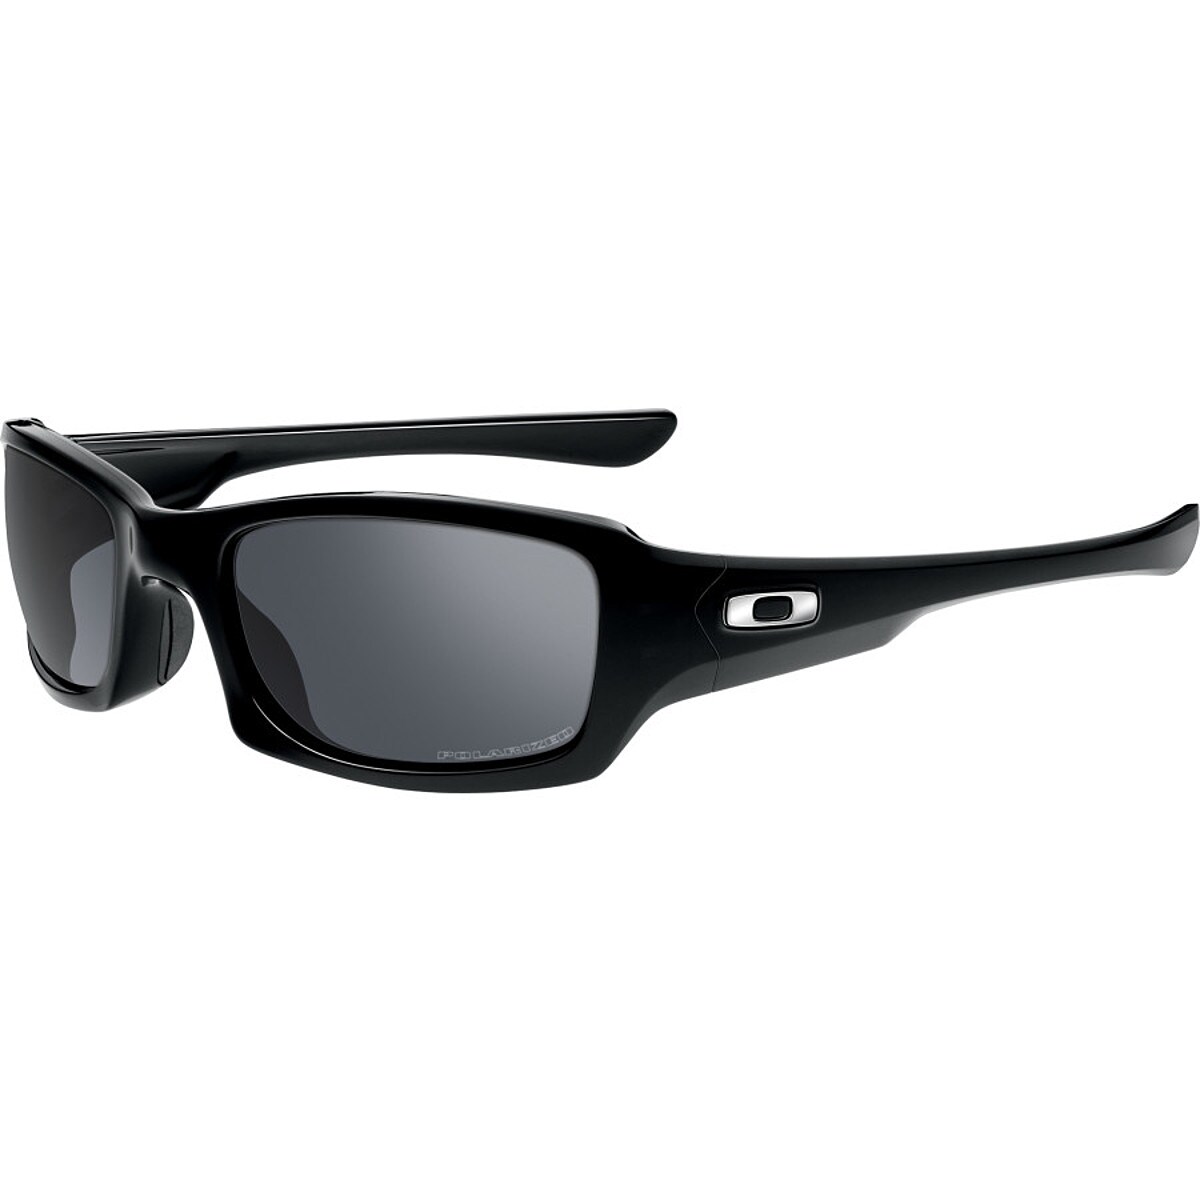 Fives Squared Polarized Sunglasses by Oakley 